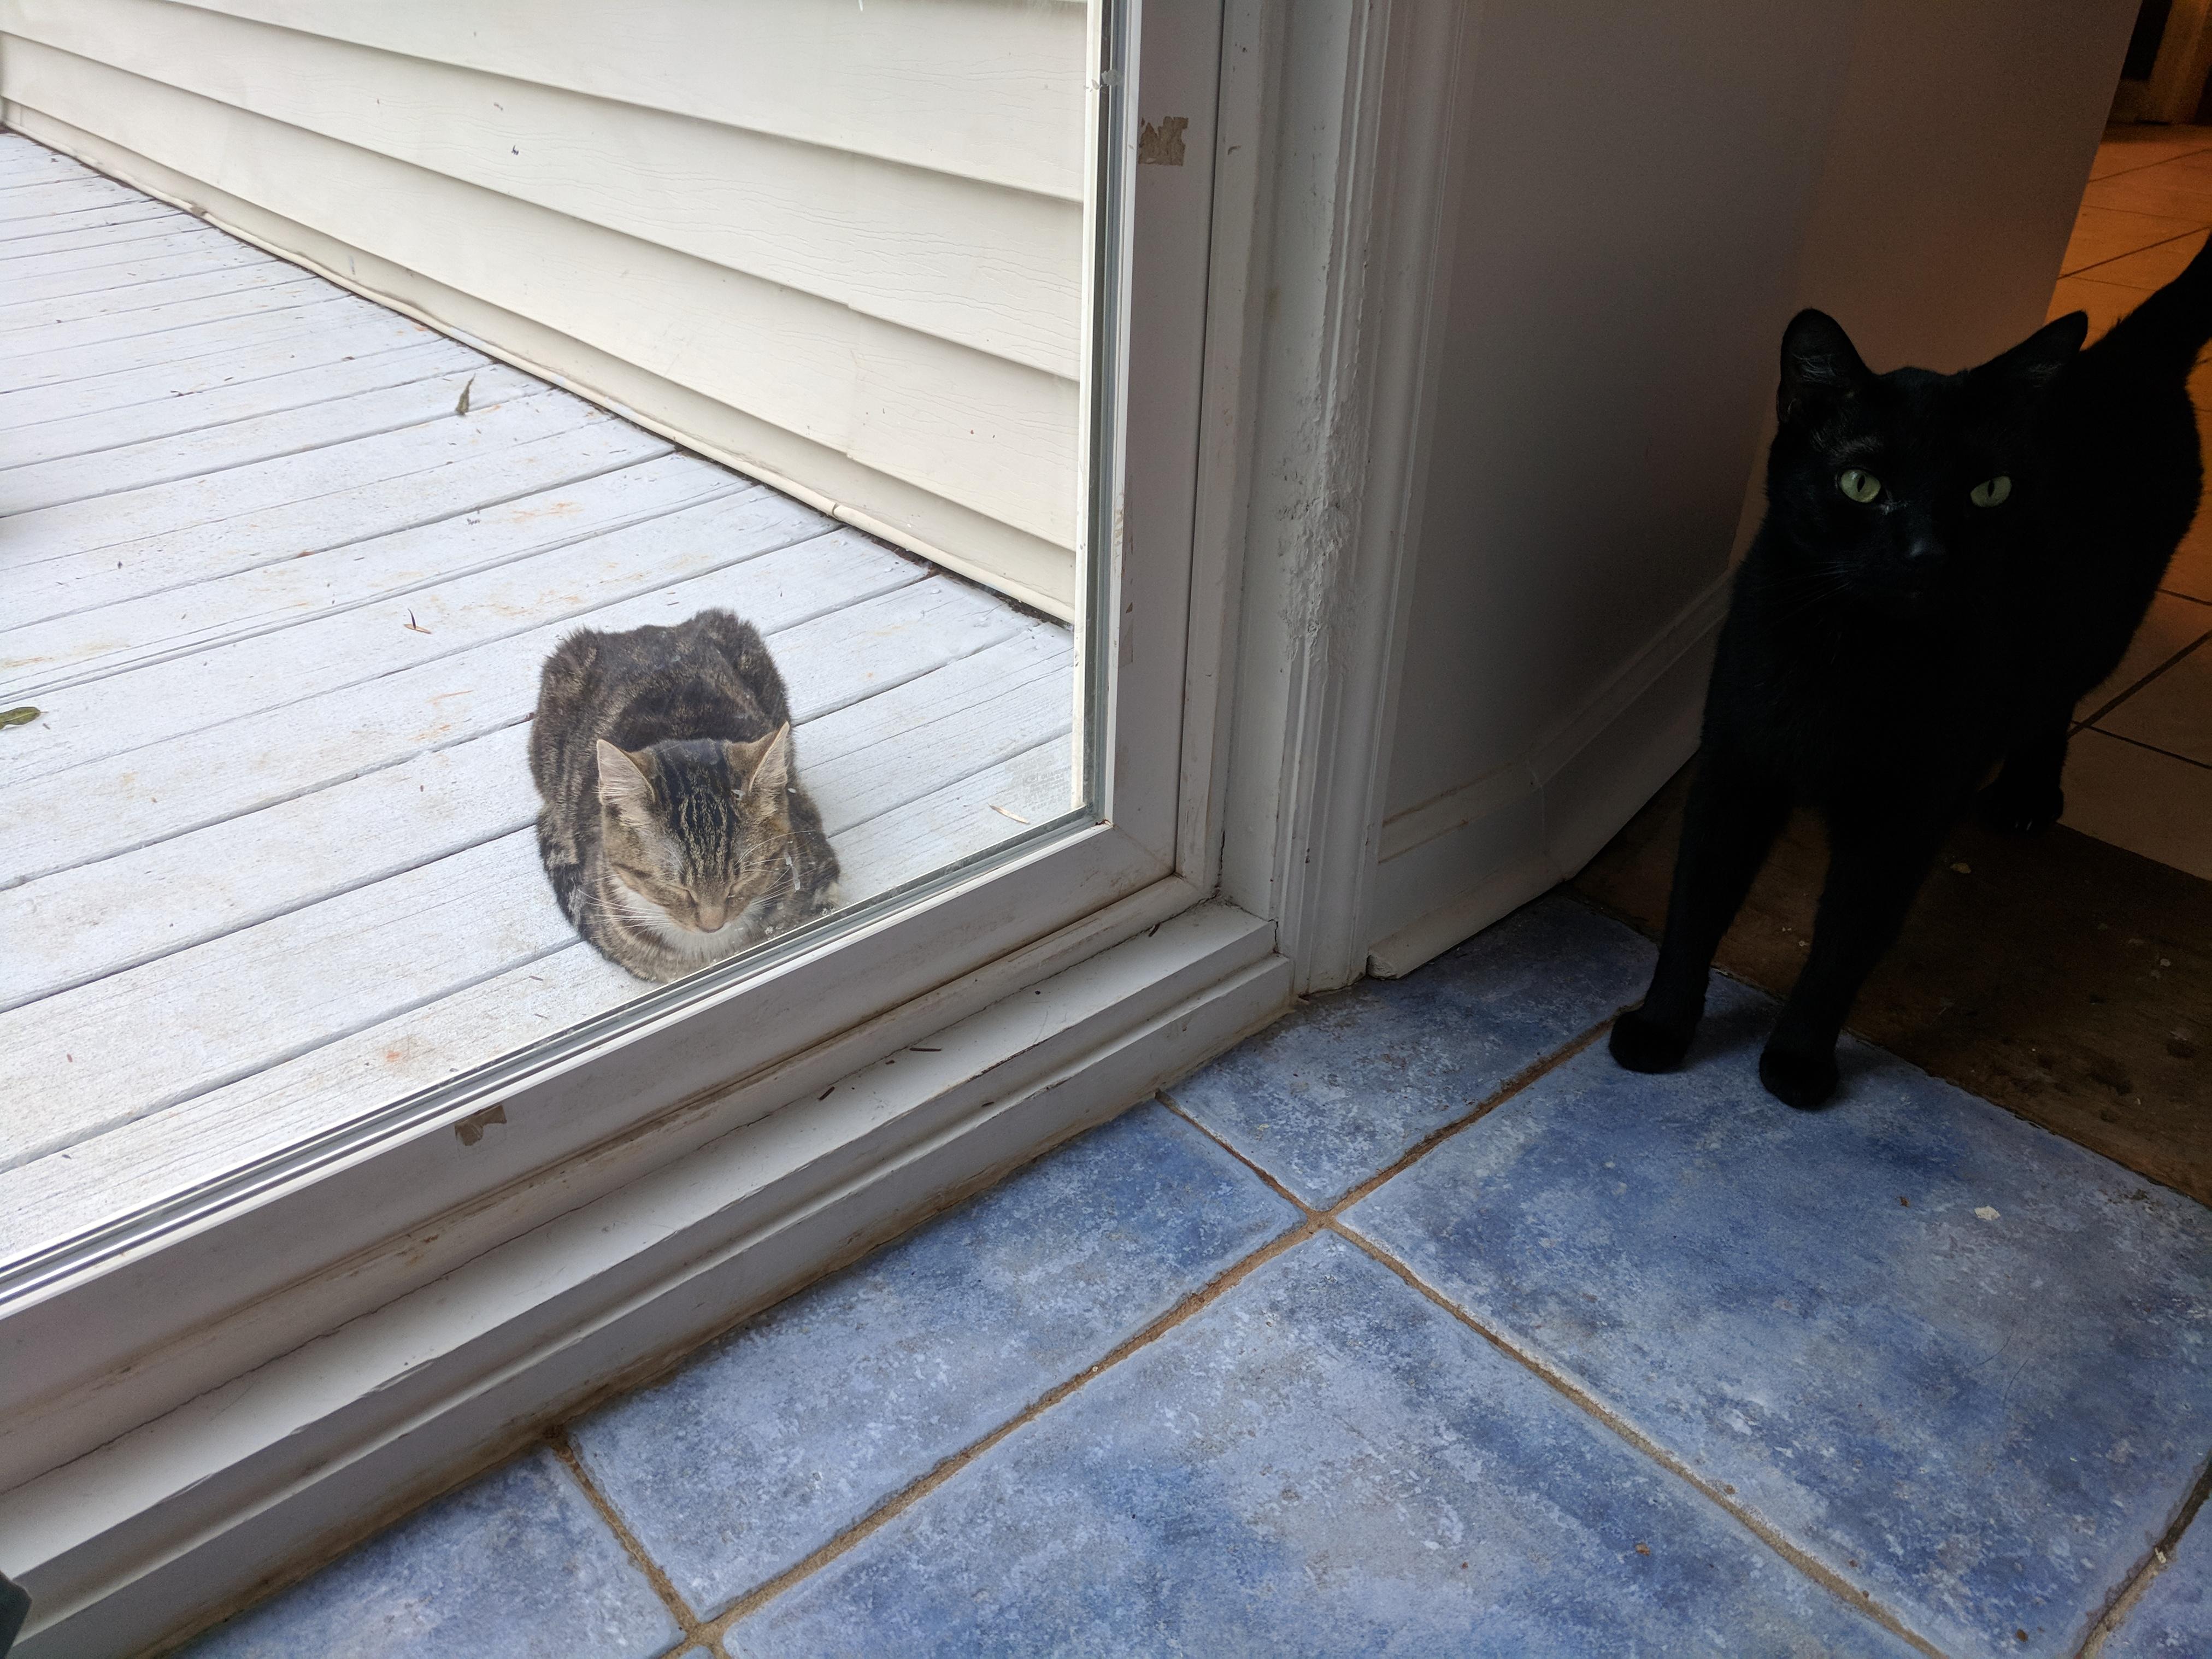 Vagrant cat loaf annoys the house cat. : Catloaf